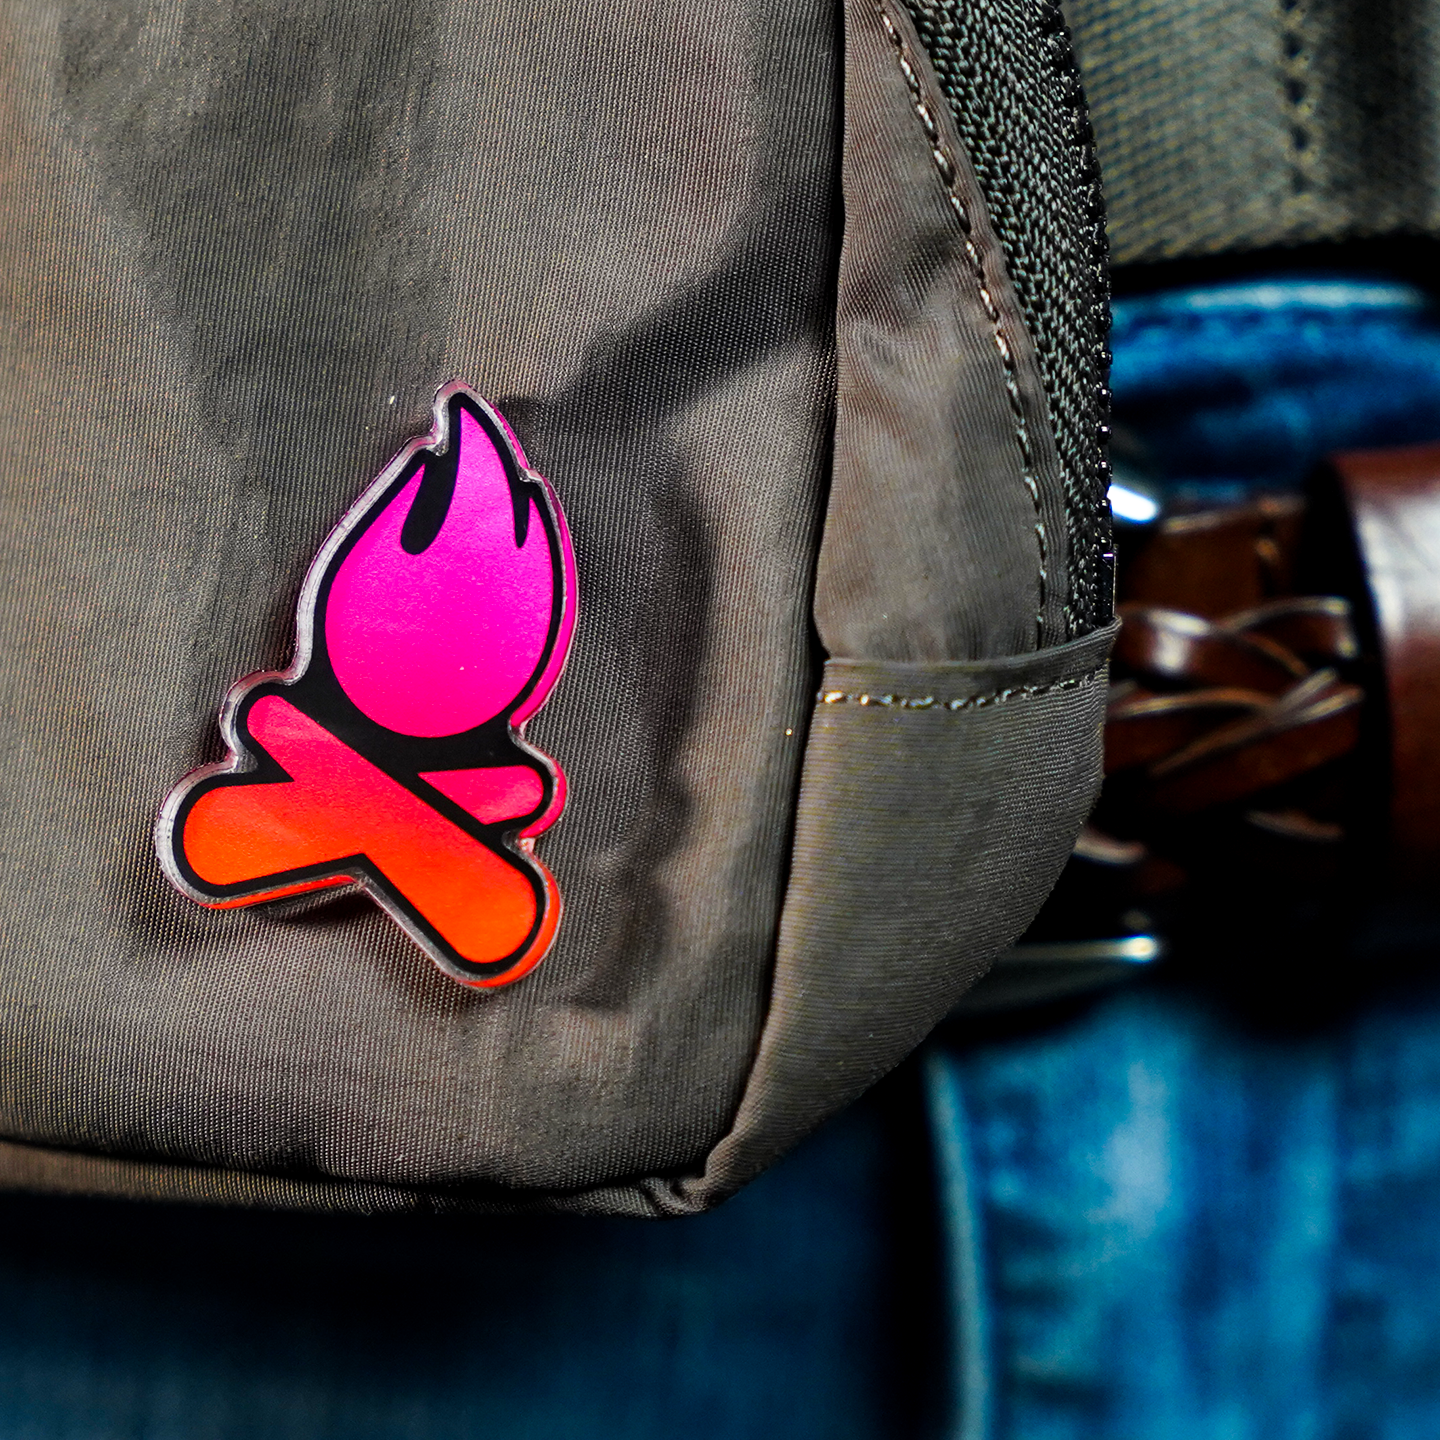 🎉 NEW: 🔥 MyTRIBE (COLLECTOR'S PIN) 🏆